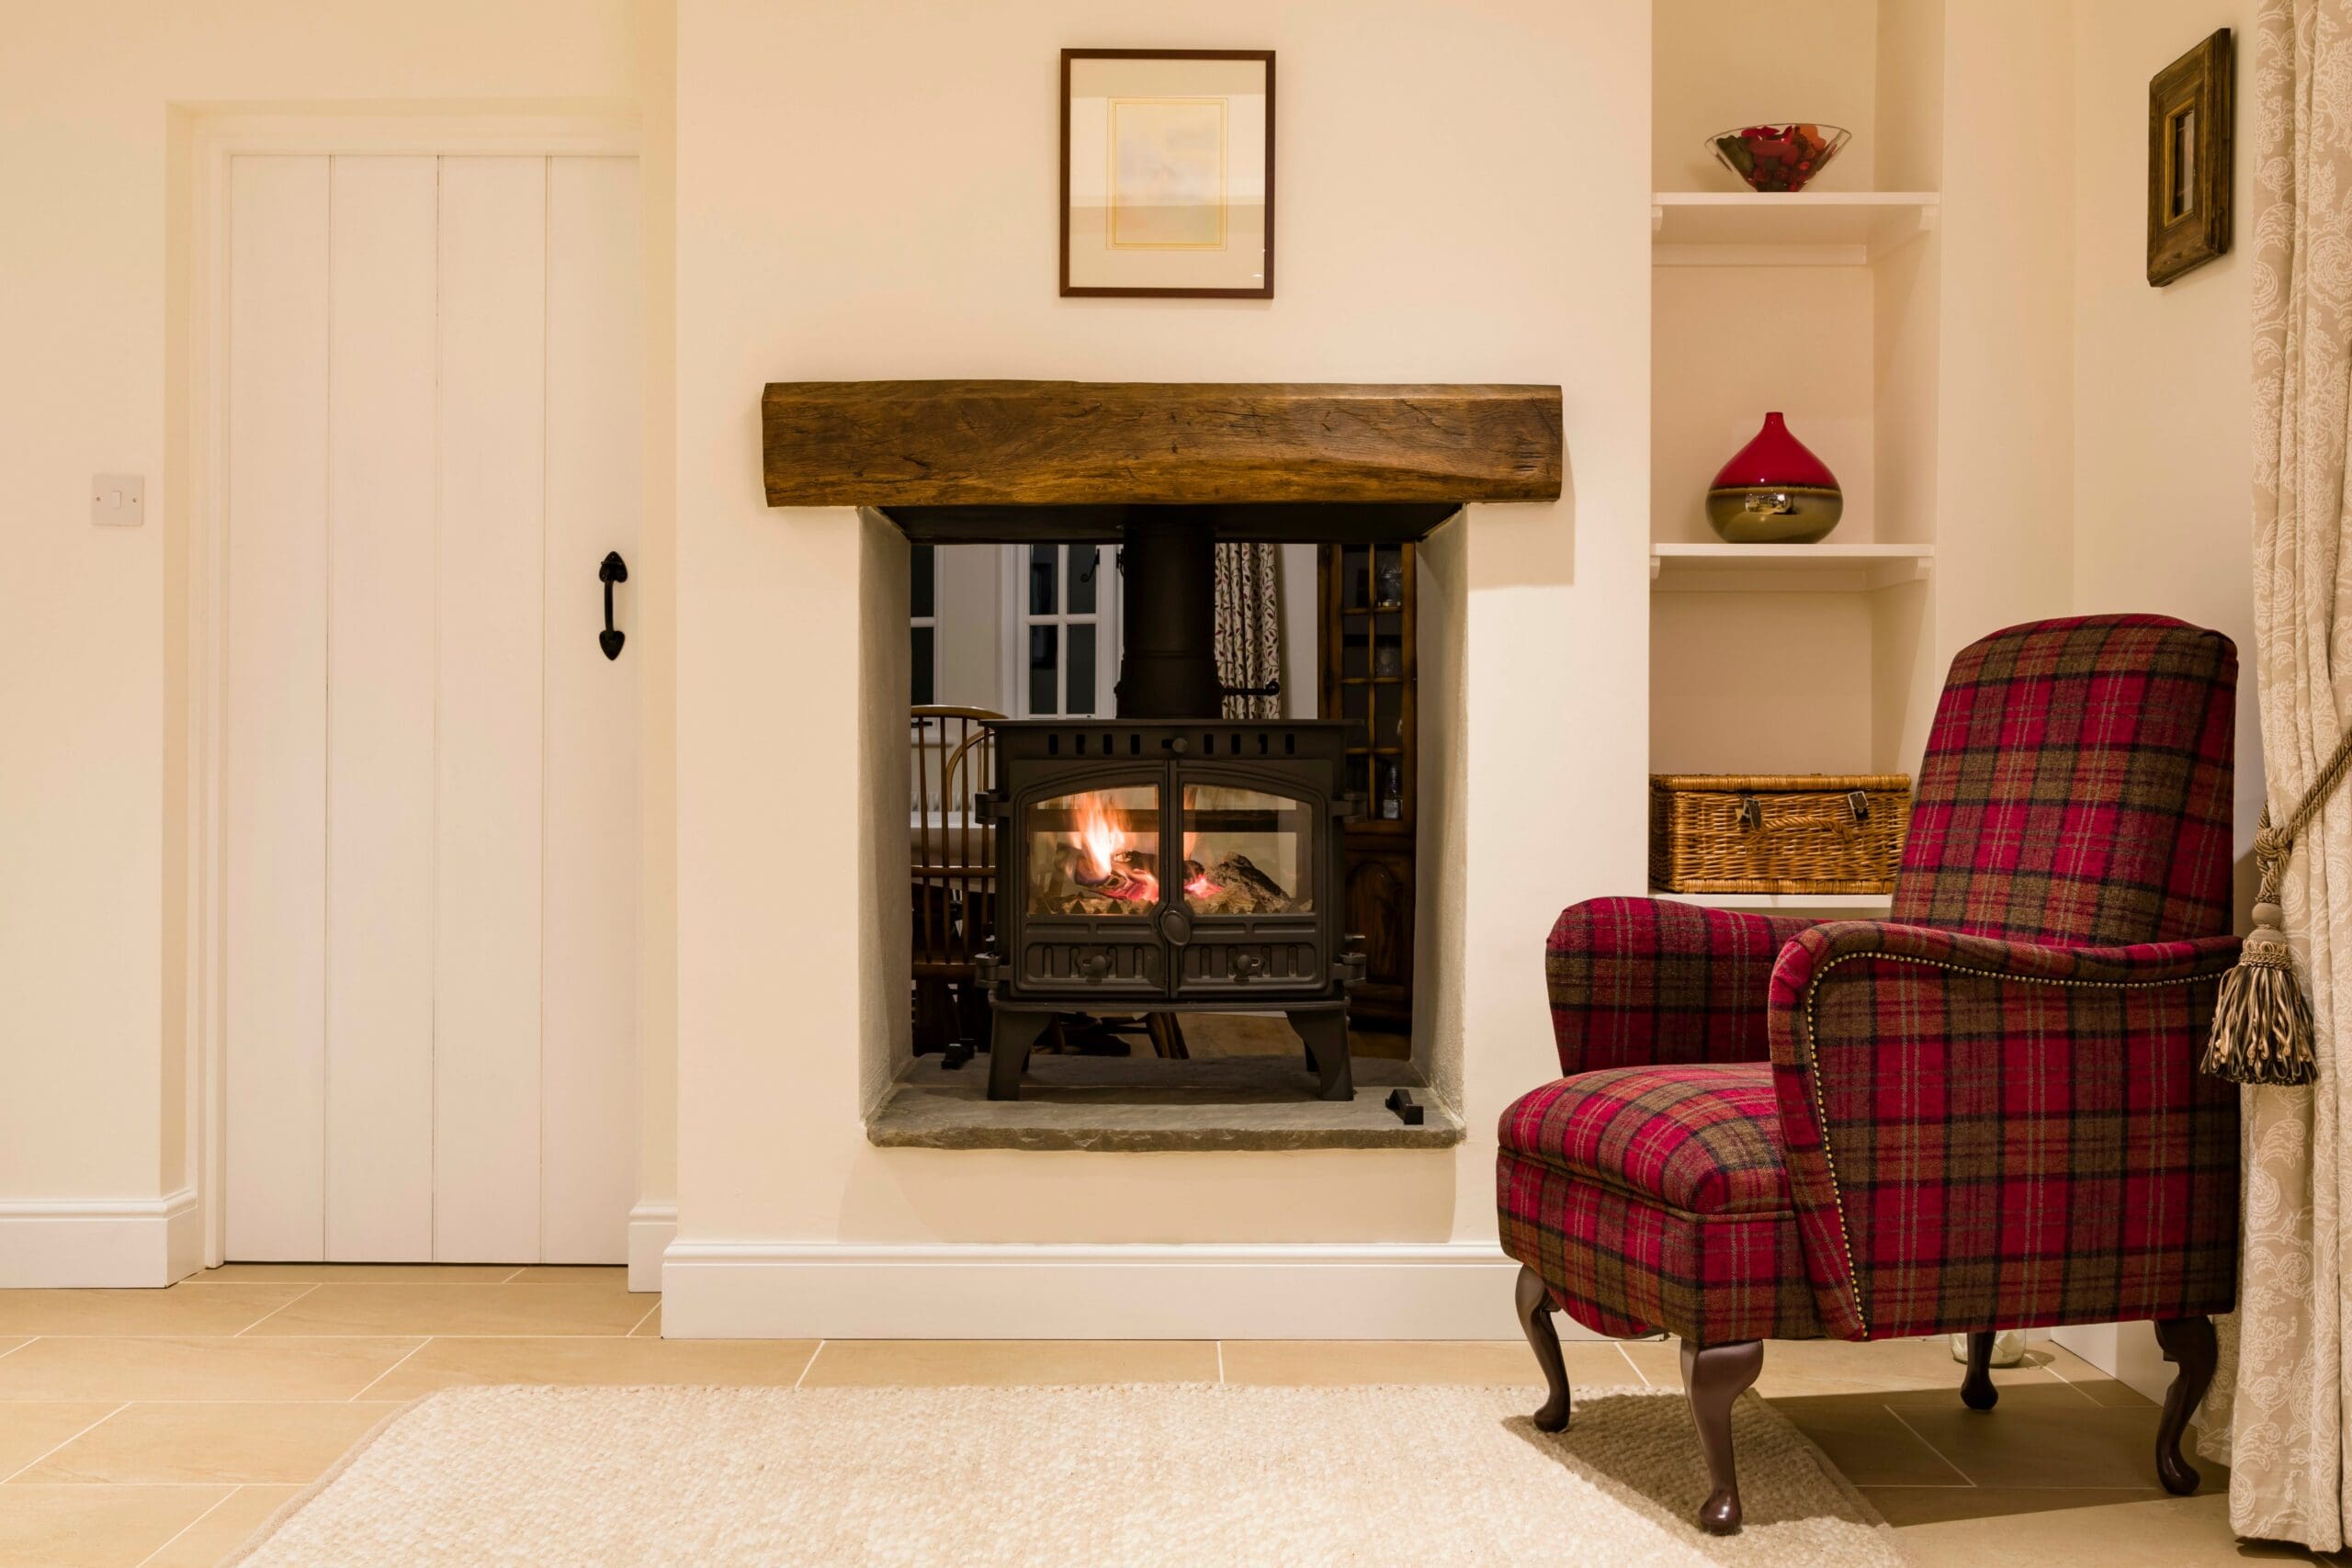 Wood burning stove in a chimney breast in a traditional home